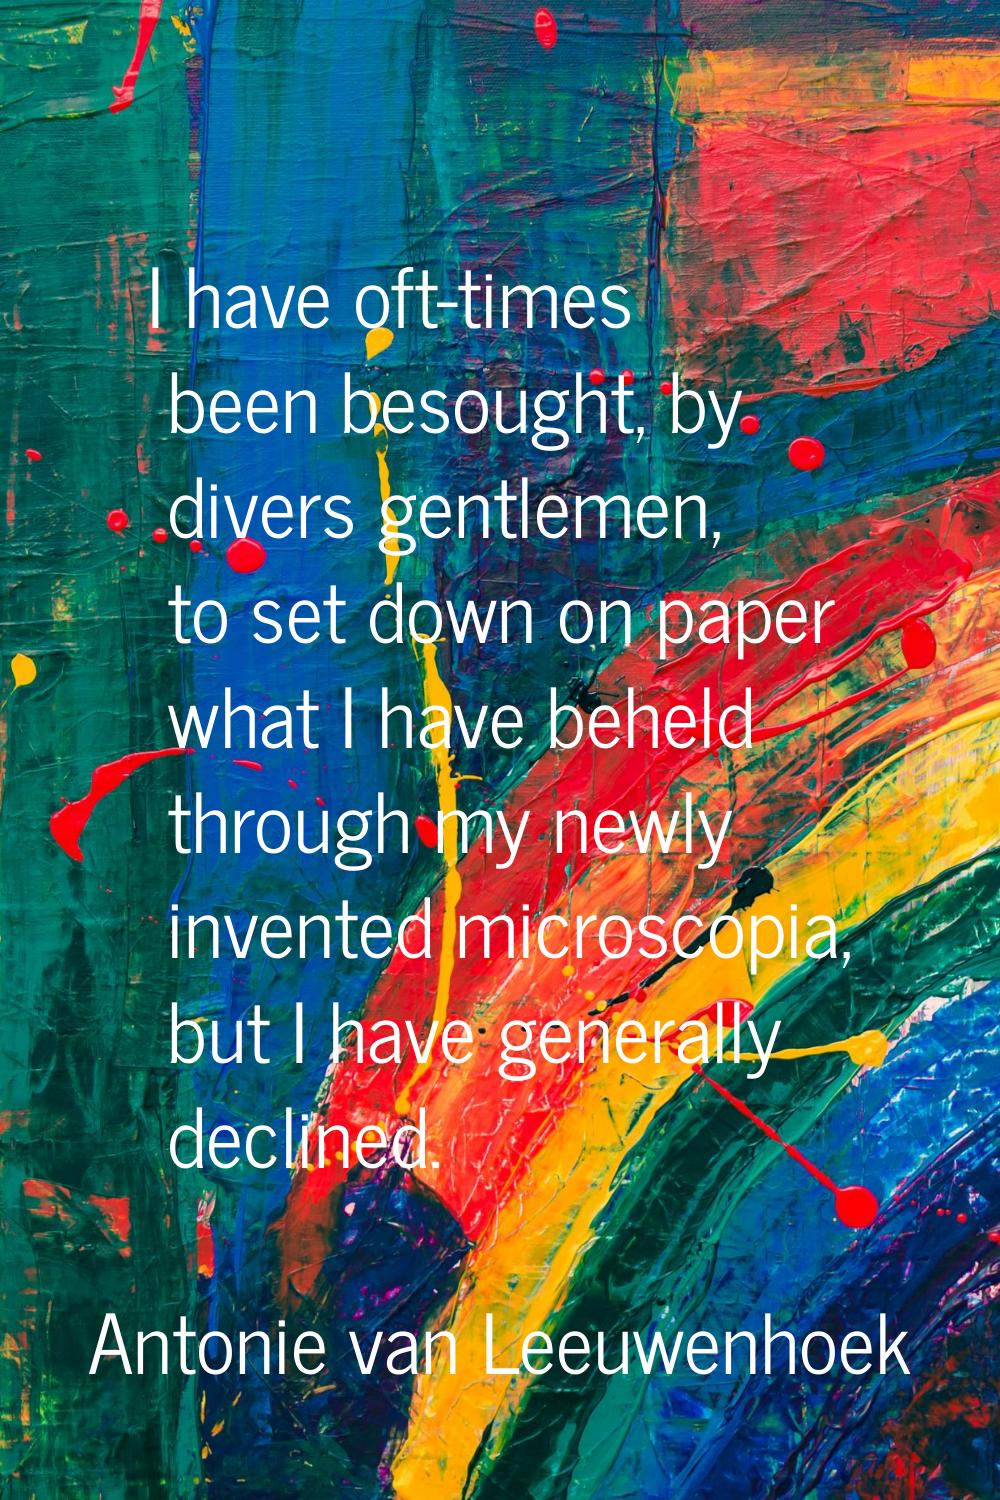 I have oft-times been besought, by divers gentlemen, to set down on paper what I have beheld throug